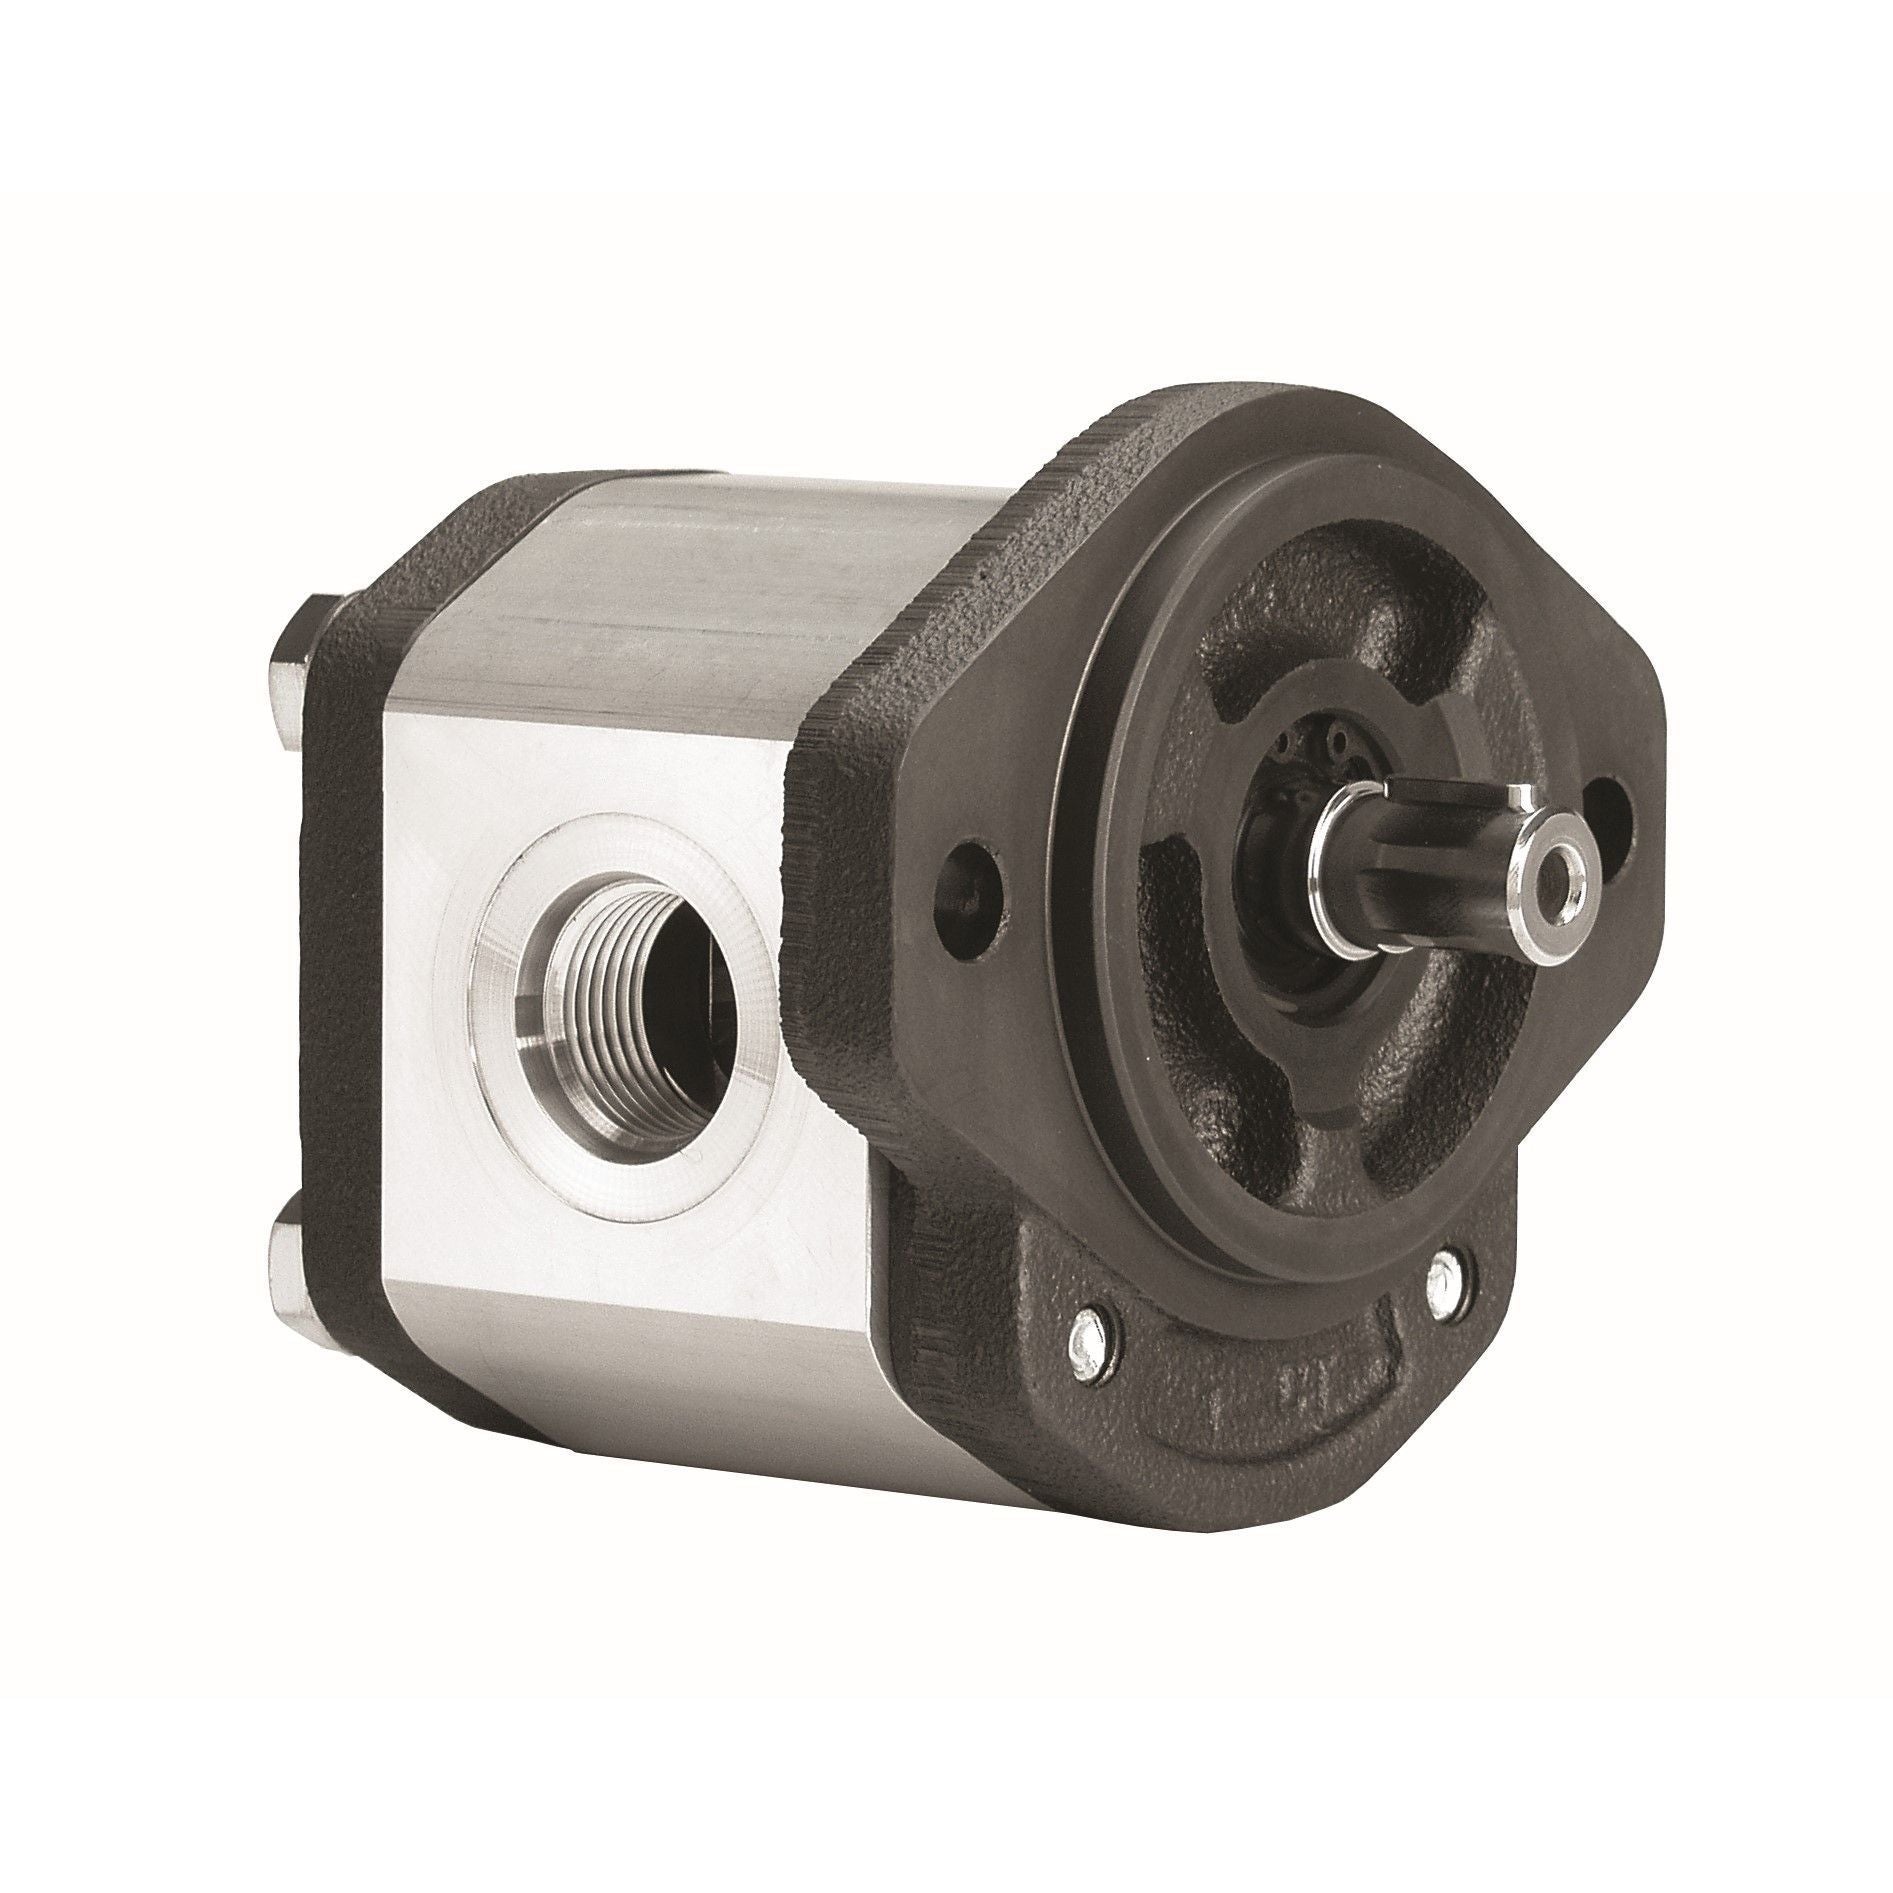 GHP2A-D-34 : Marzocchi Gear Pump, CW, 23.7cc (1.4457in3), 11.27 GPM, 3335psi, 2000 RPM, #12 SAE (3/4") In, #10 SAE (5/8") Out, Keyed Shaft 5/8" Bore x 5/32" Key, SAE A 2-Bolt Mount